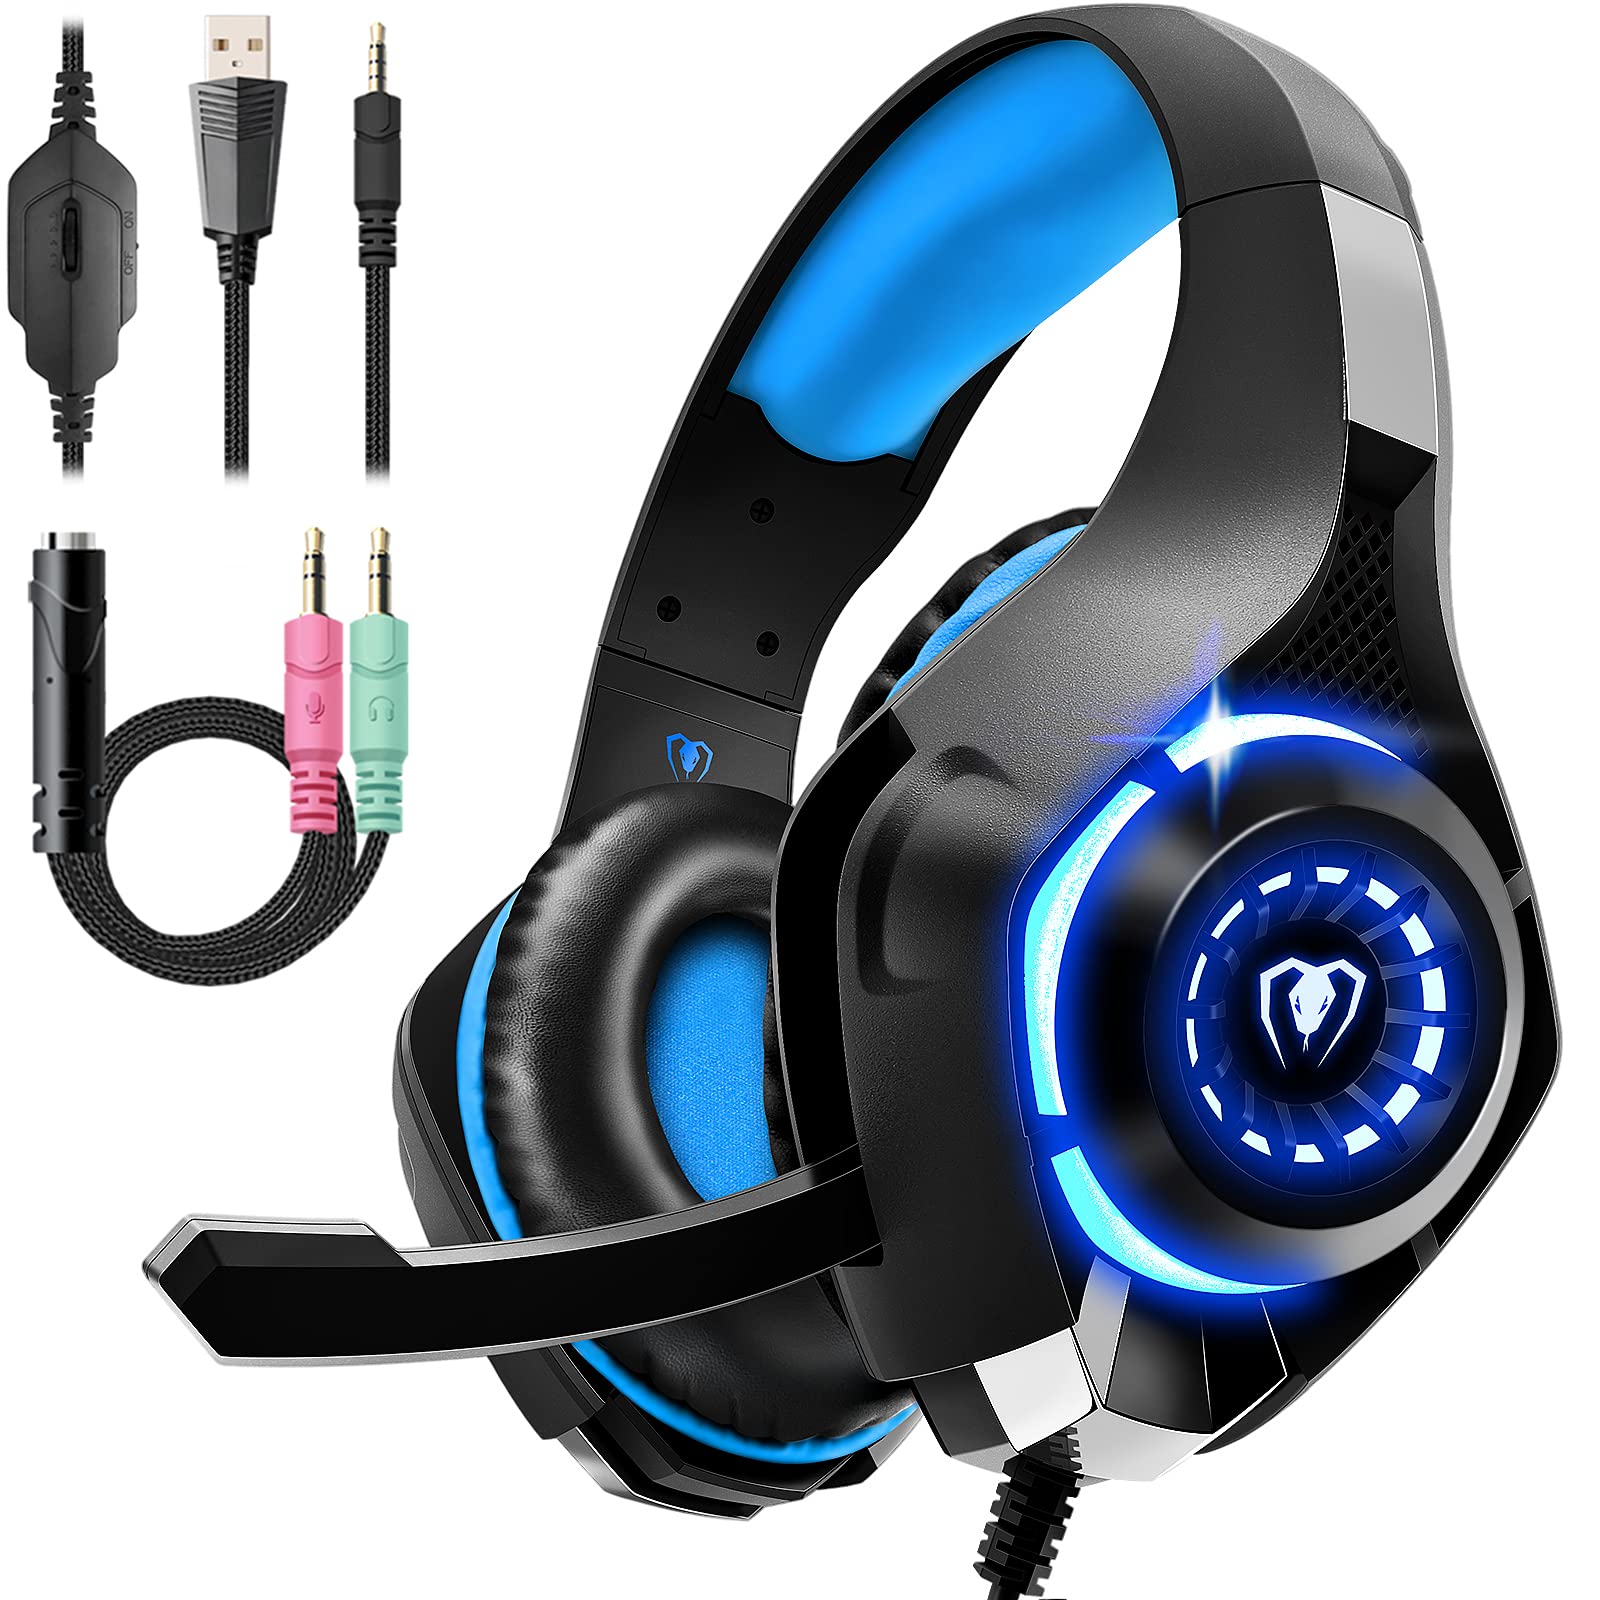 Tatybo Gaming Headset for PS4 PS5 Xbox One Switch PC with Noise Canceling Mic, Deep Bass Stereo Sound - amzGamess